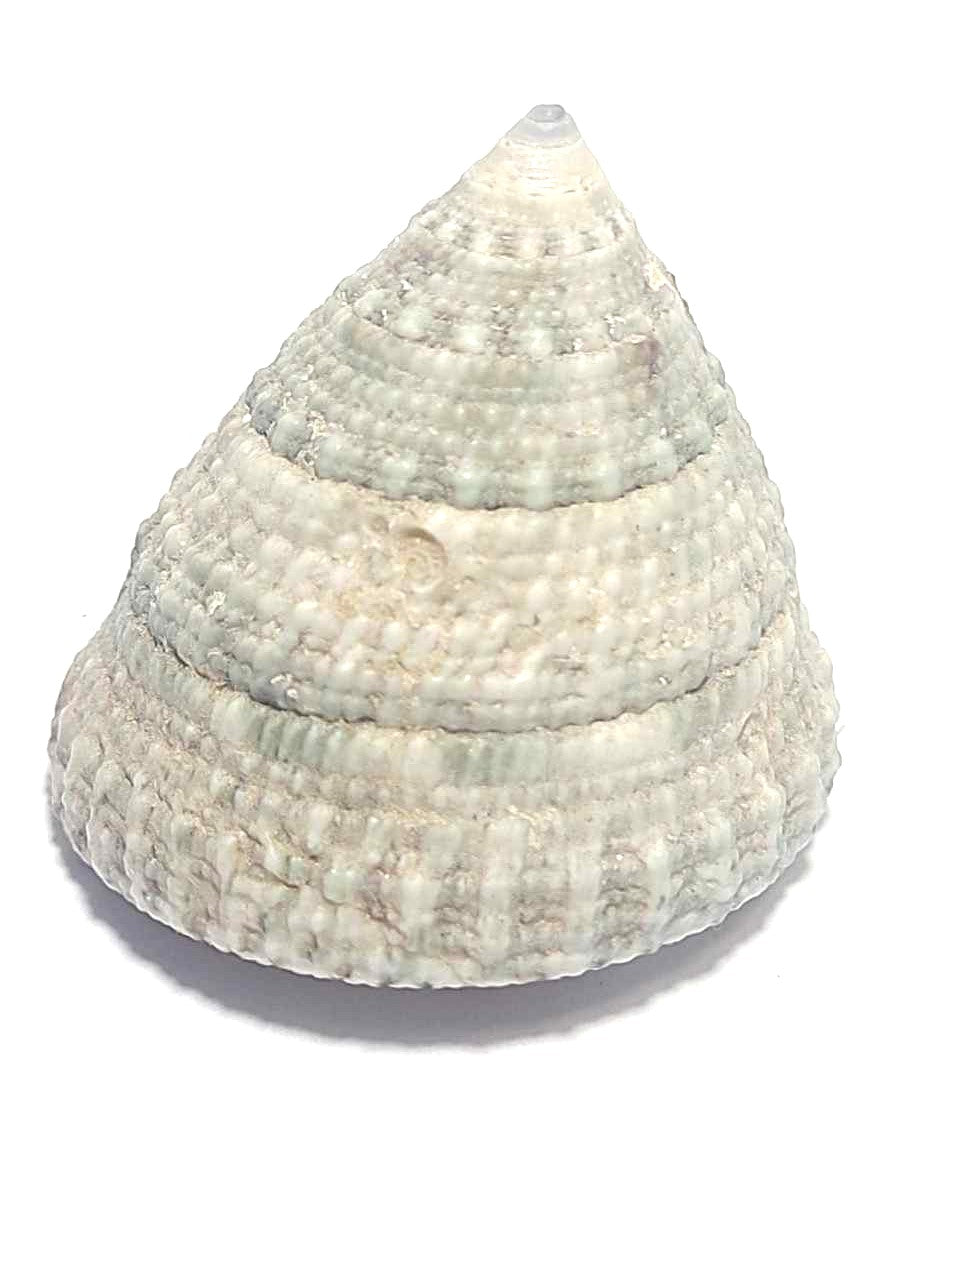 Pointed Seashell, 1.5 inch